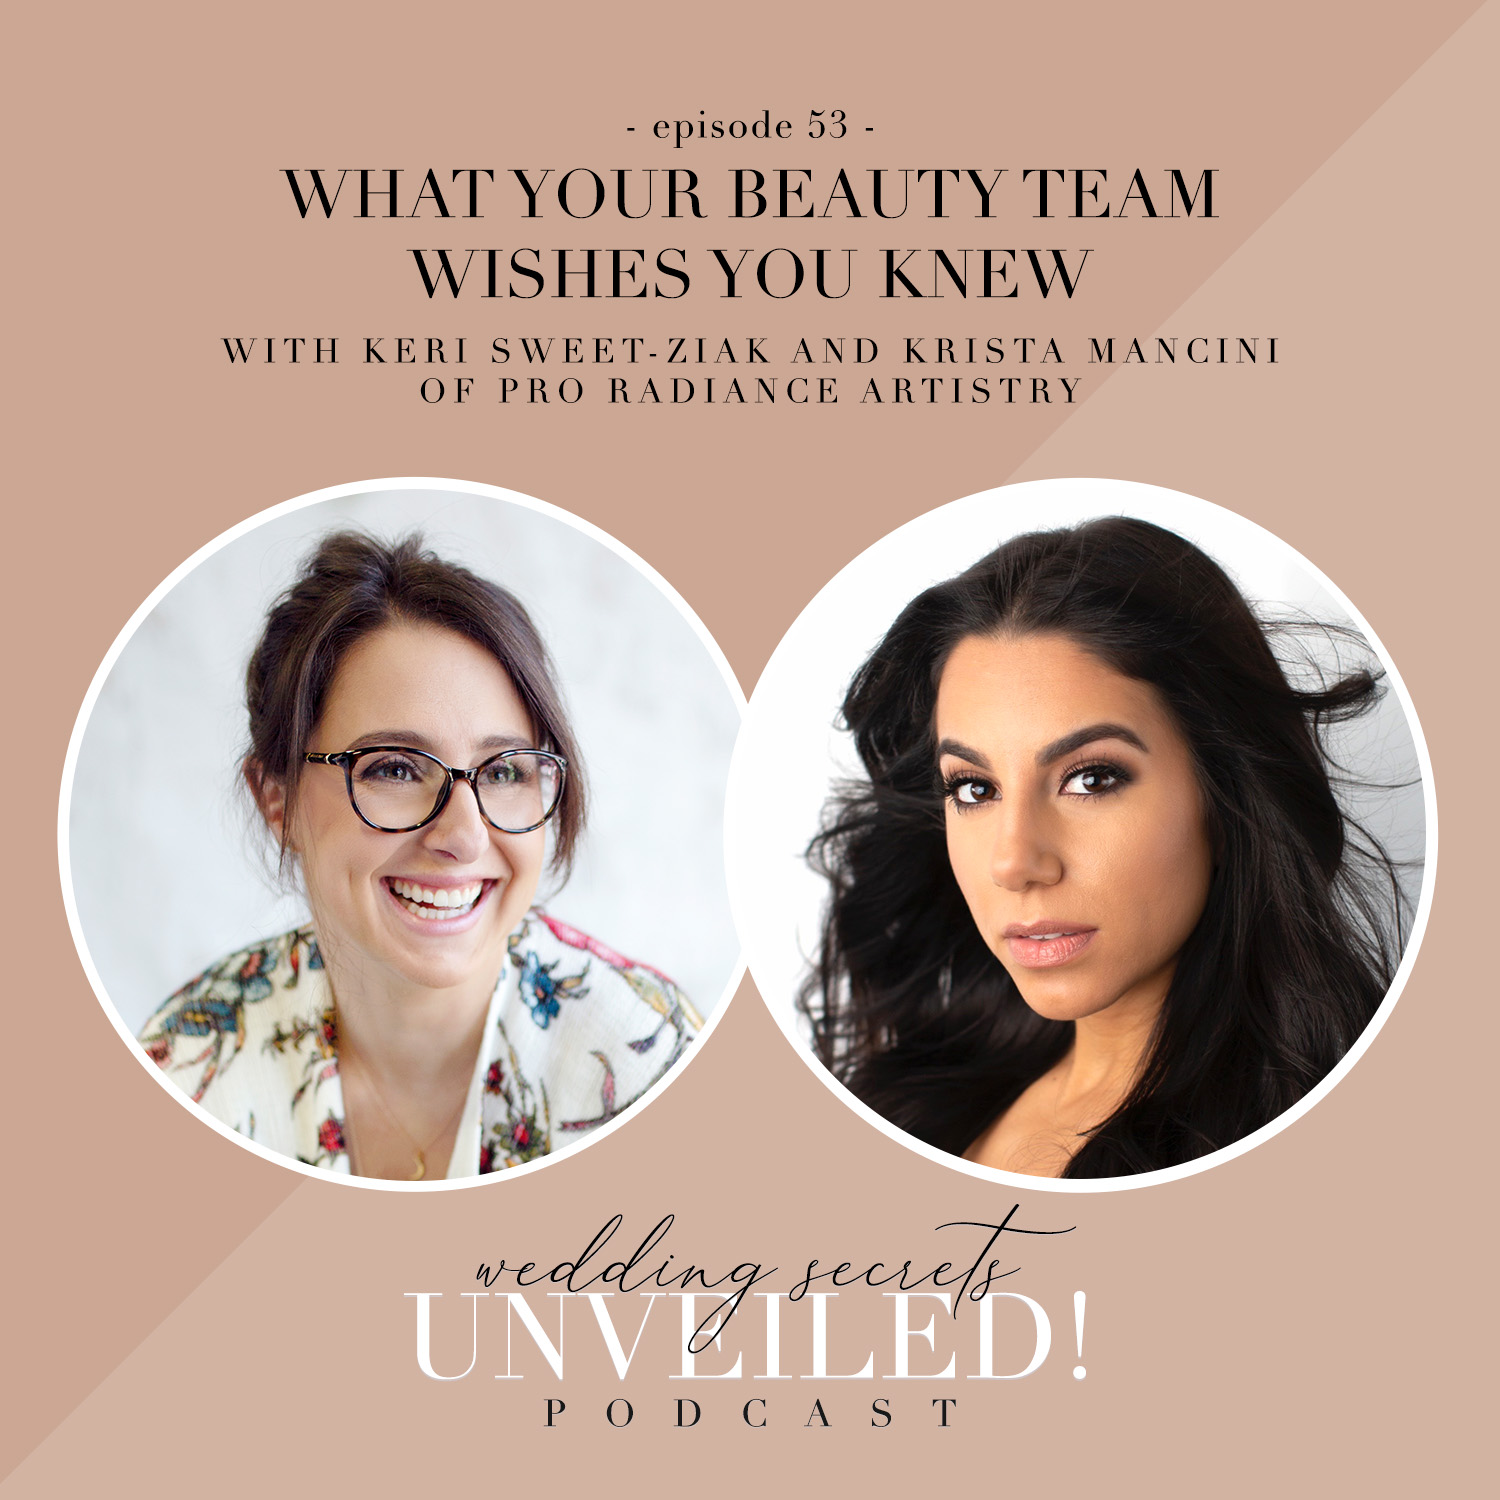 What Your Beauty Team Wishes You Knew: Interview with Krista Mancini and Keri Sweet-Ziak of Pro Radiance Artistry